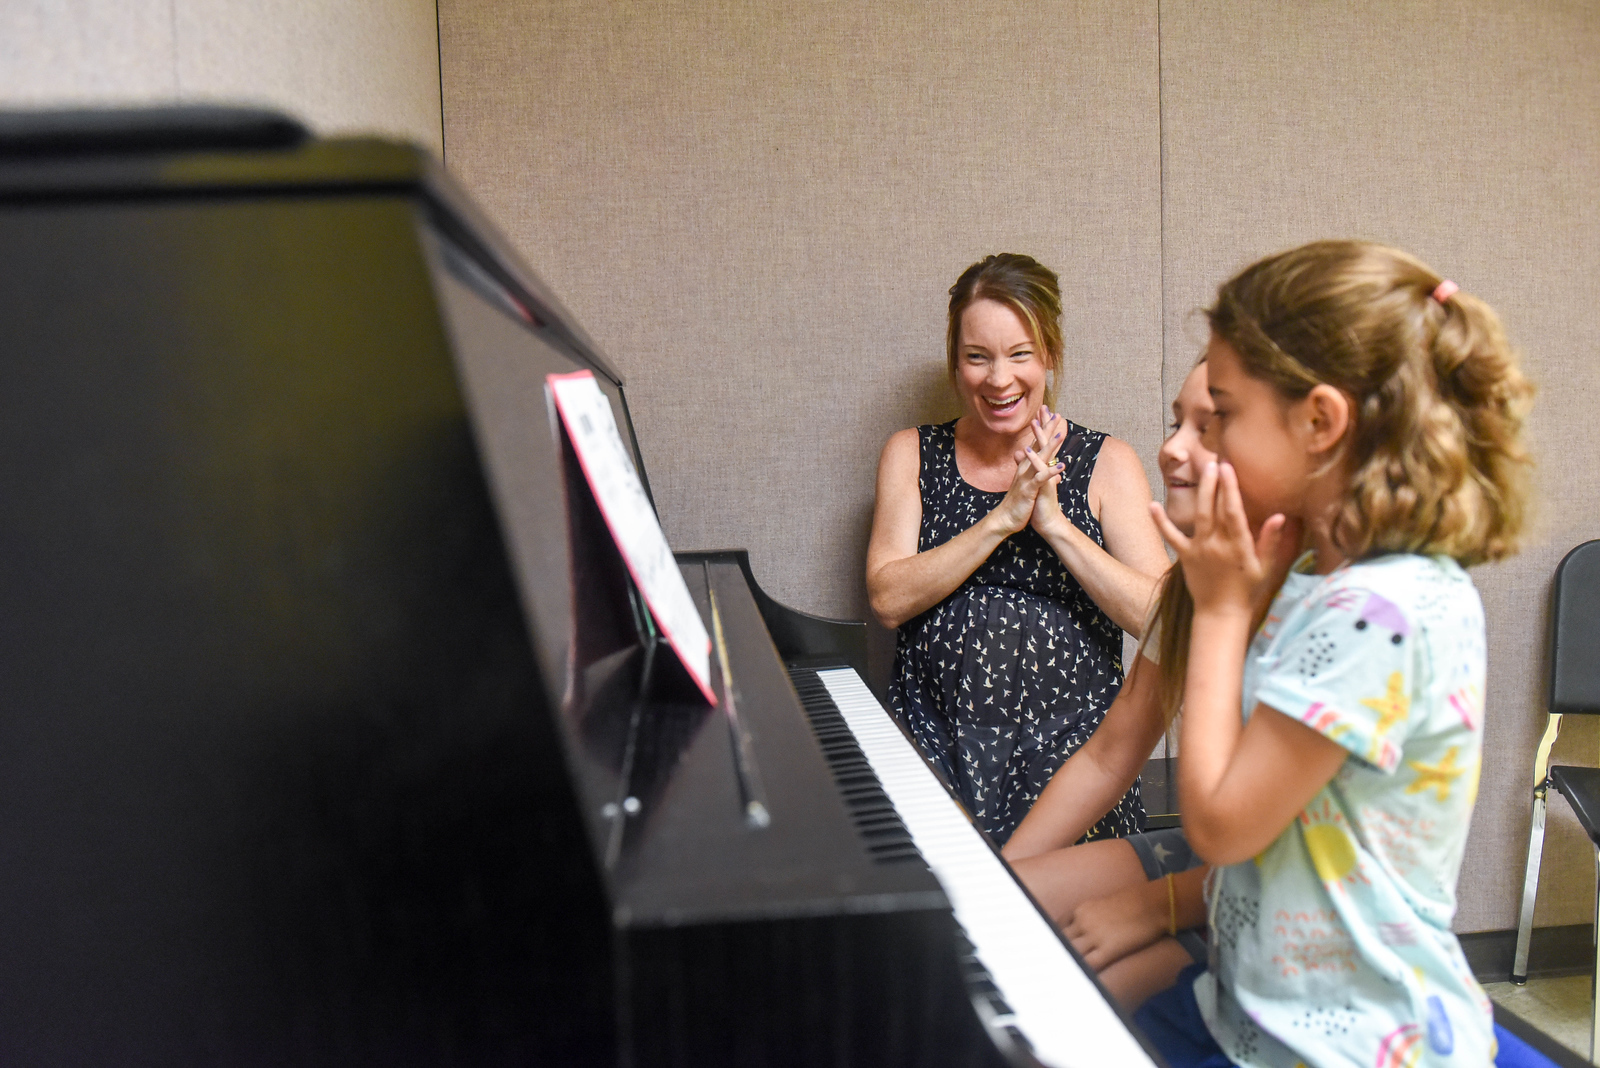 woman giving a piano lesson to two girls